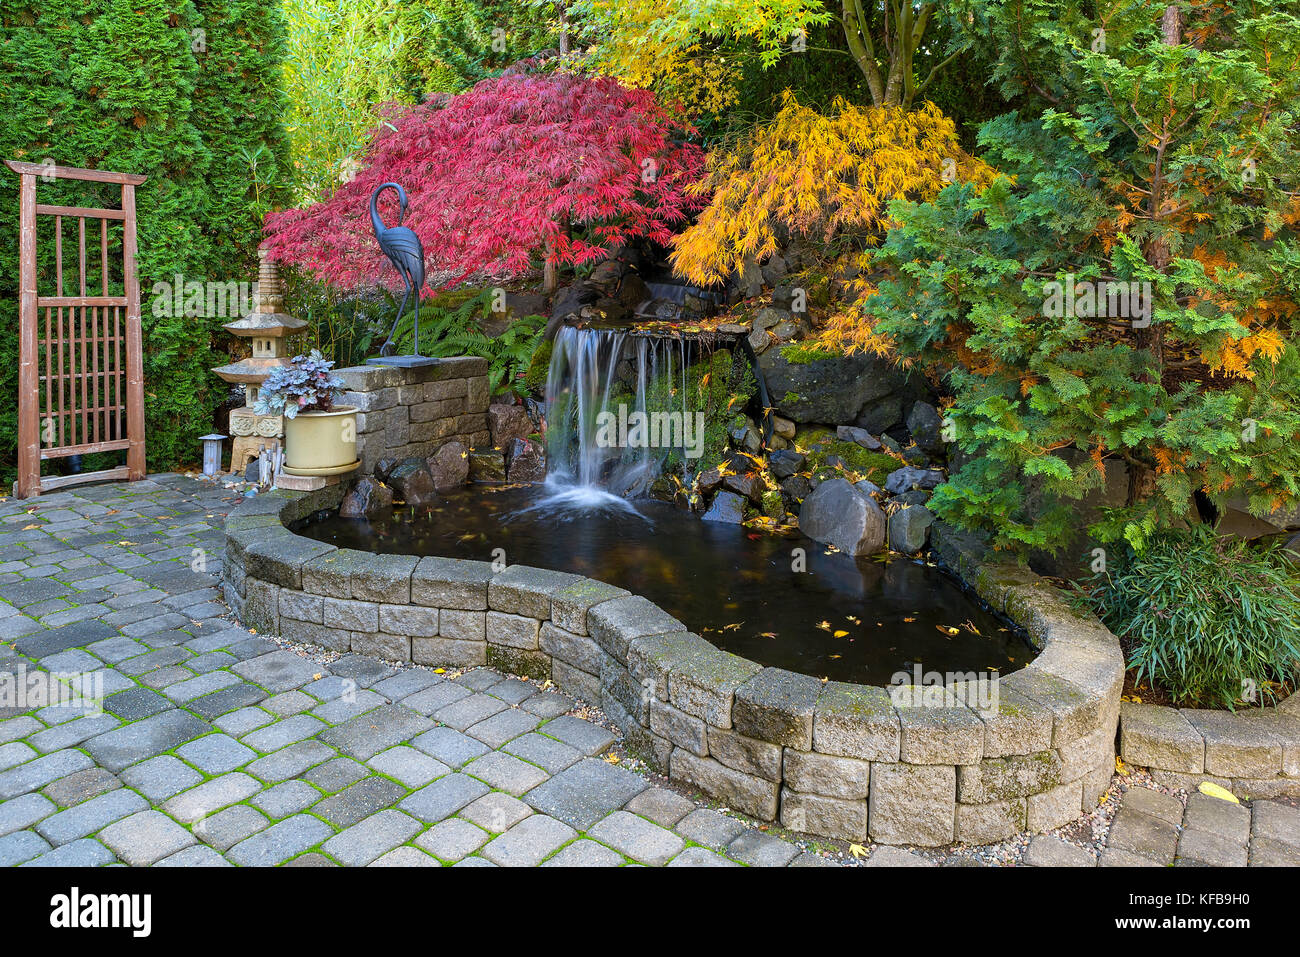 Home garden waterfall pond with brick paver stone hardscape and trees in fall season colors Stock Photo